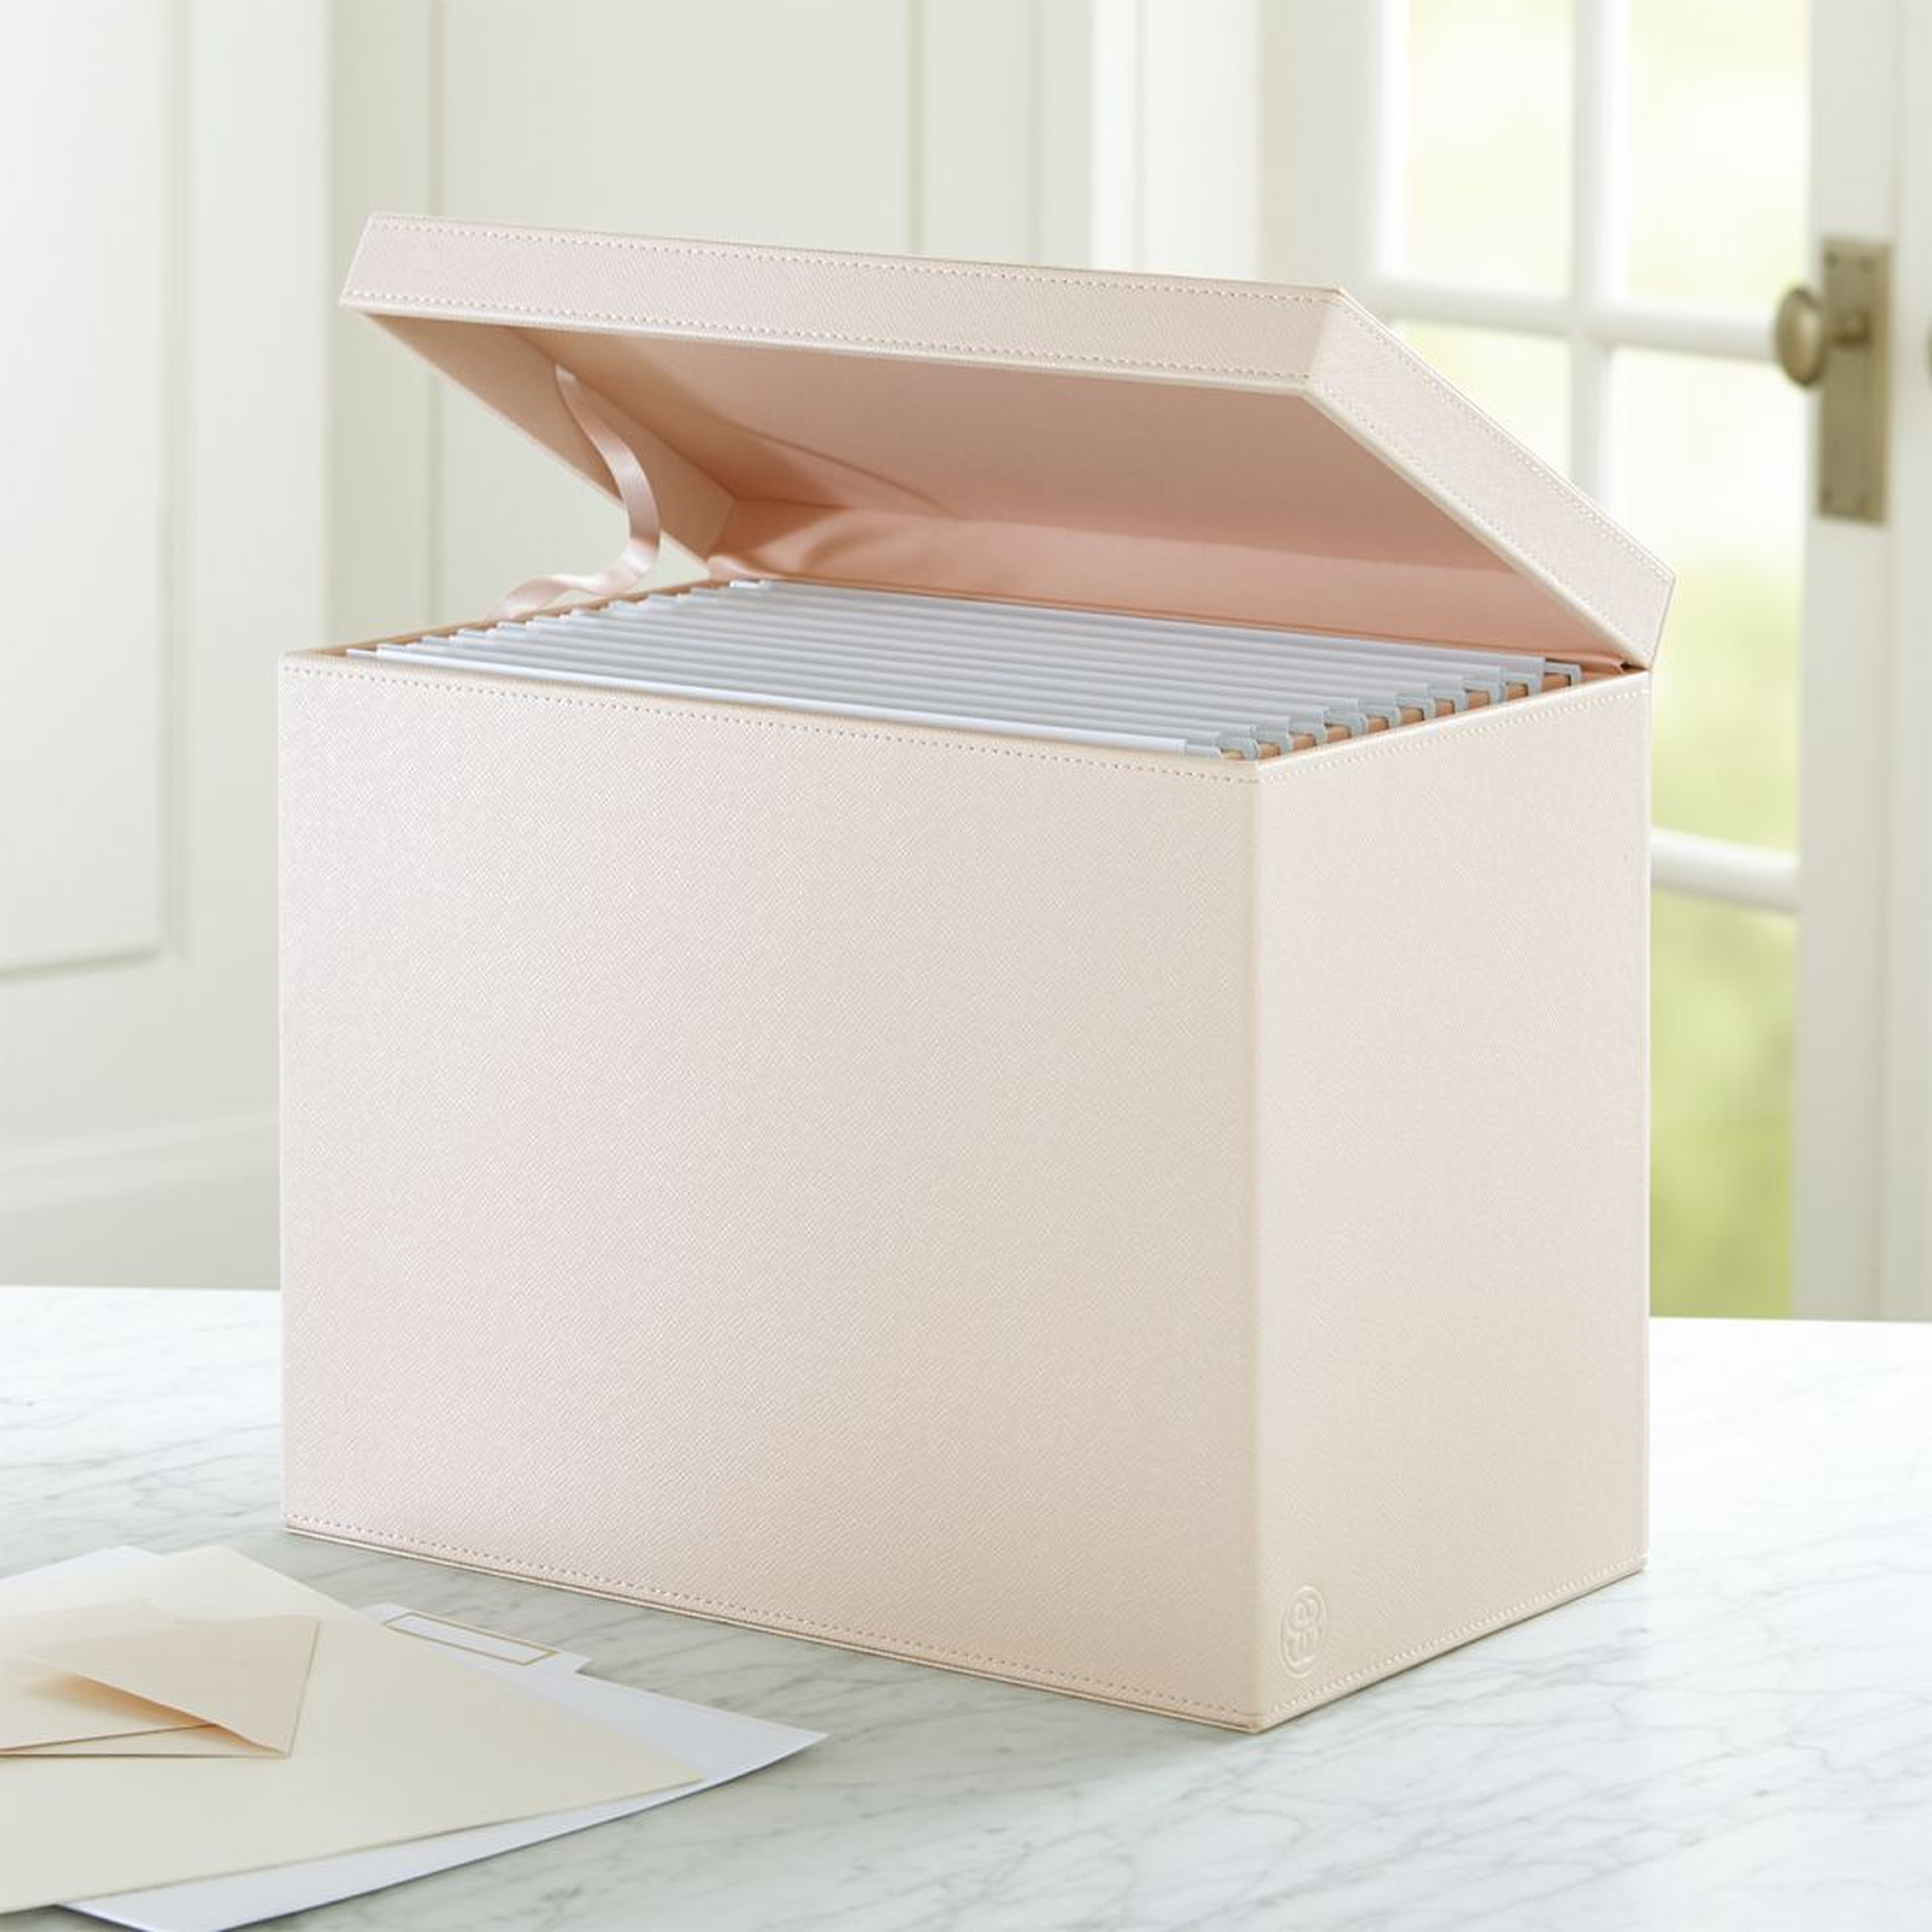 Agency Blush/Pale Pink Hanging File Box - Crate and Barrel